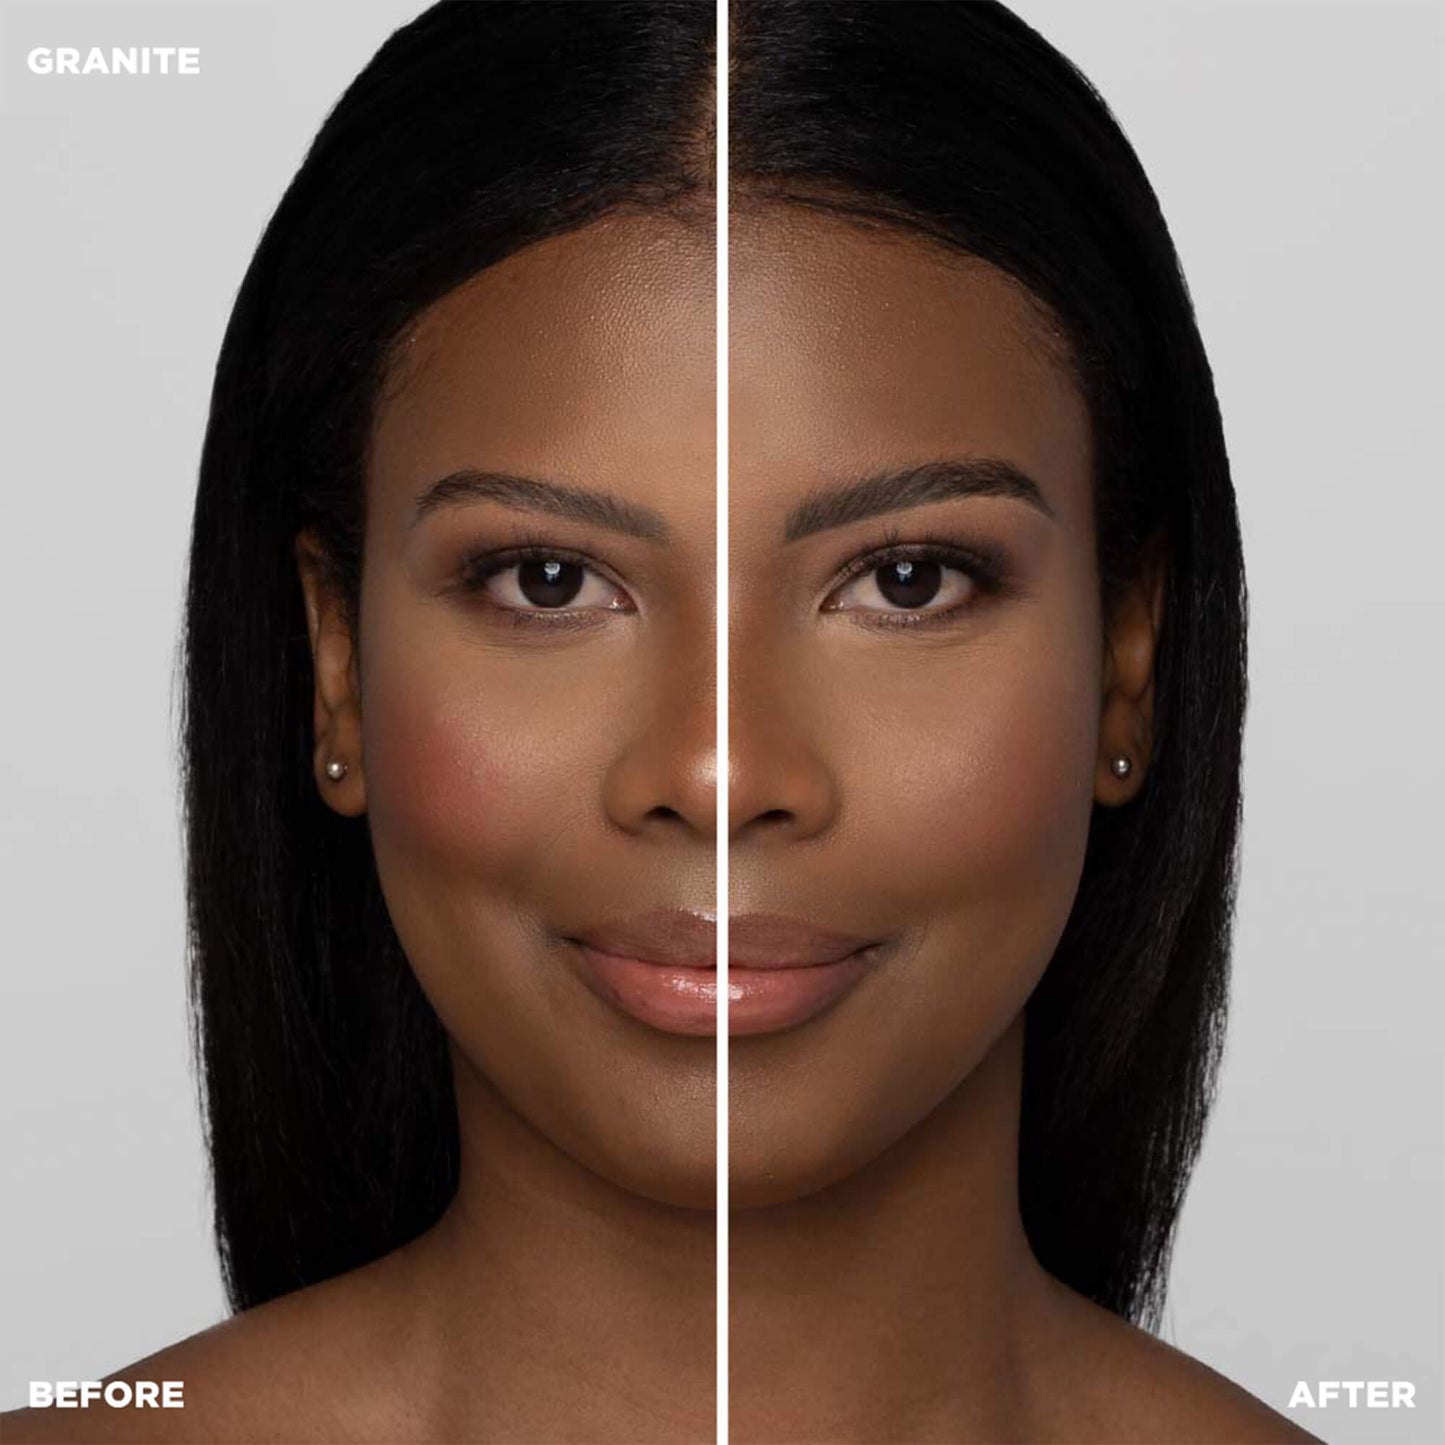 Before and after shot of model wearing Color-Granite - Black